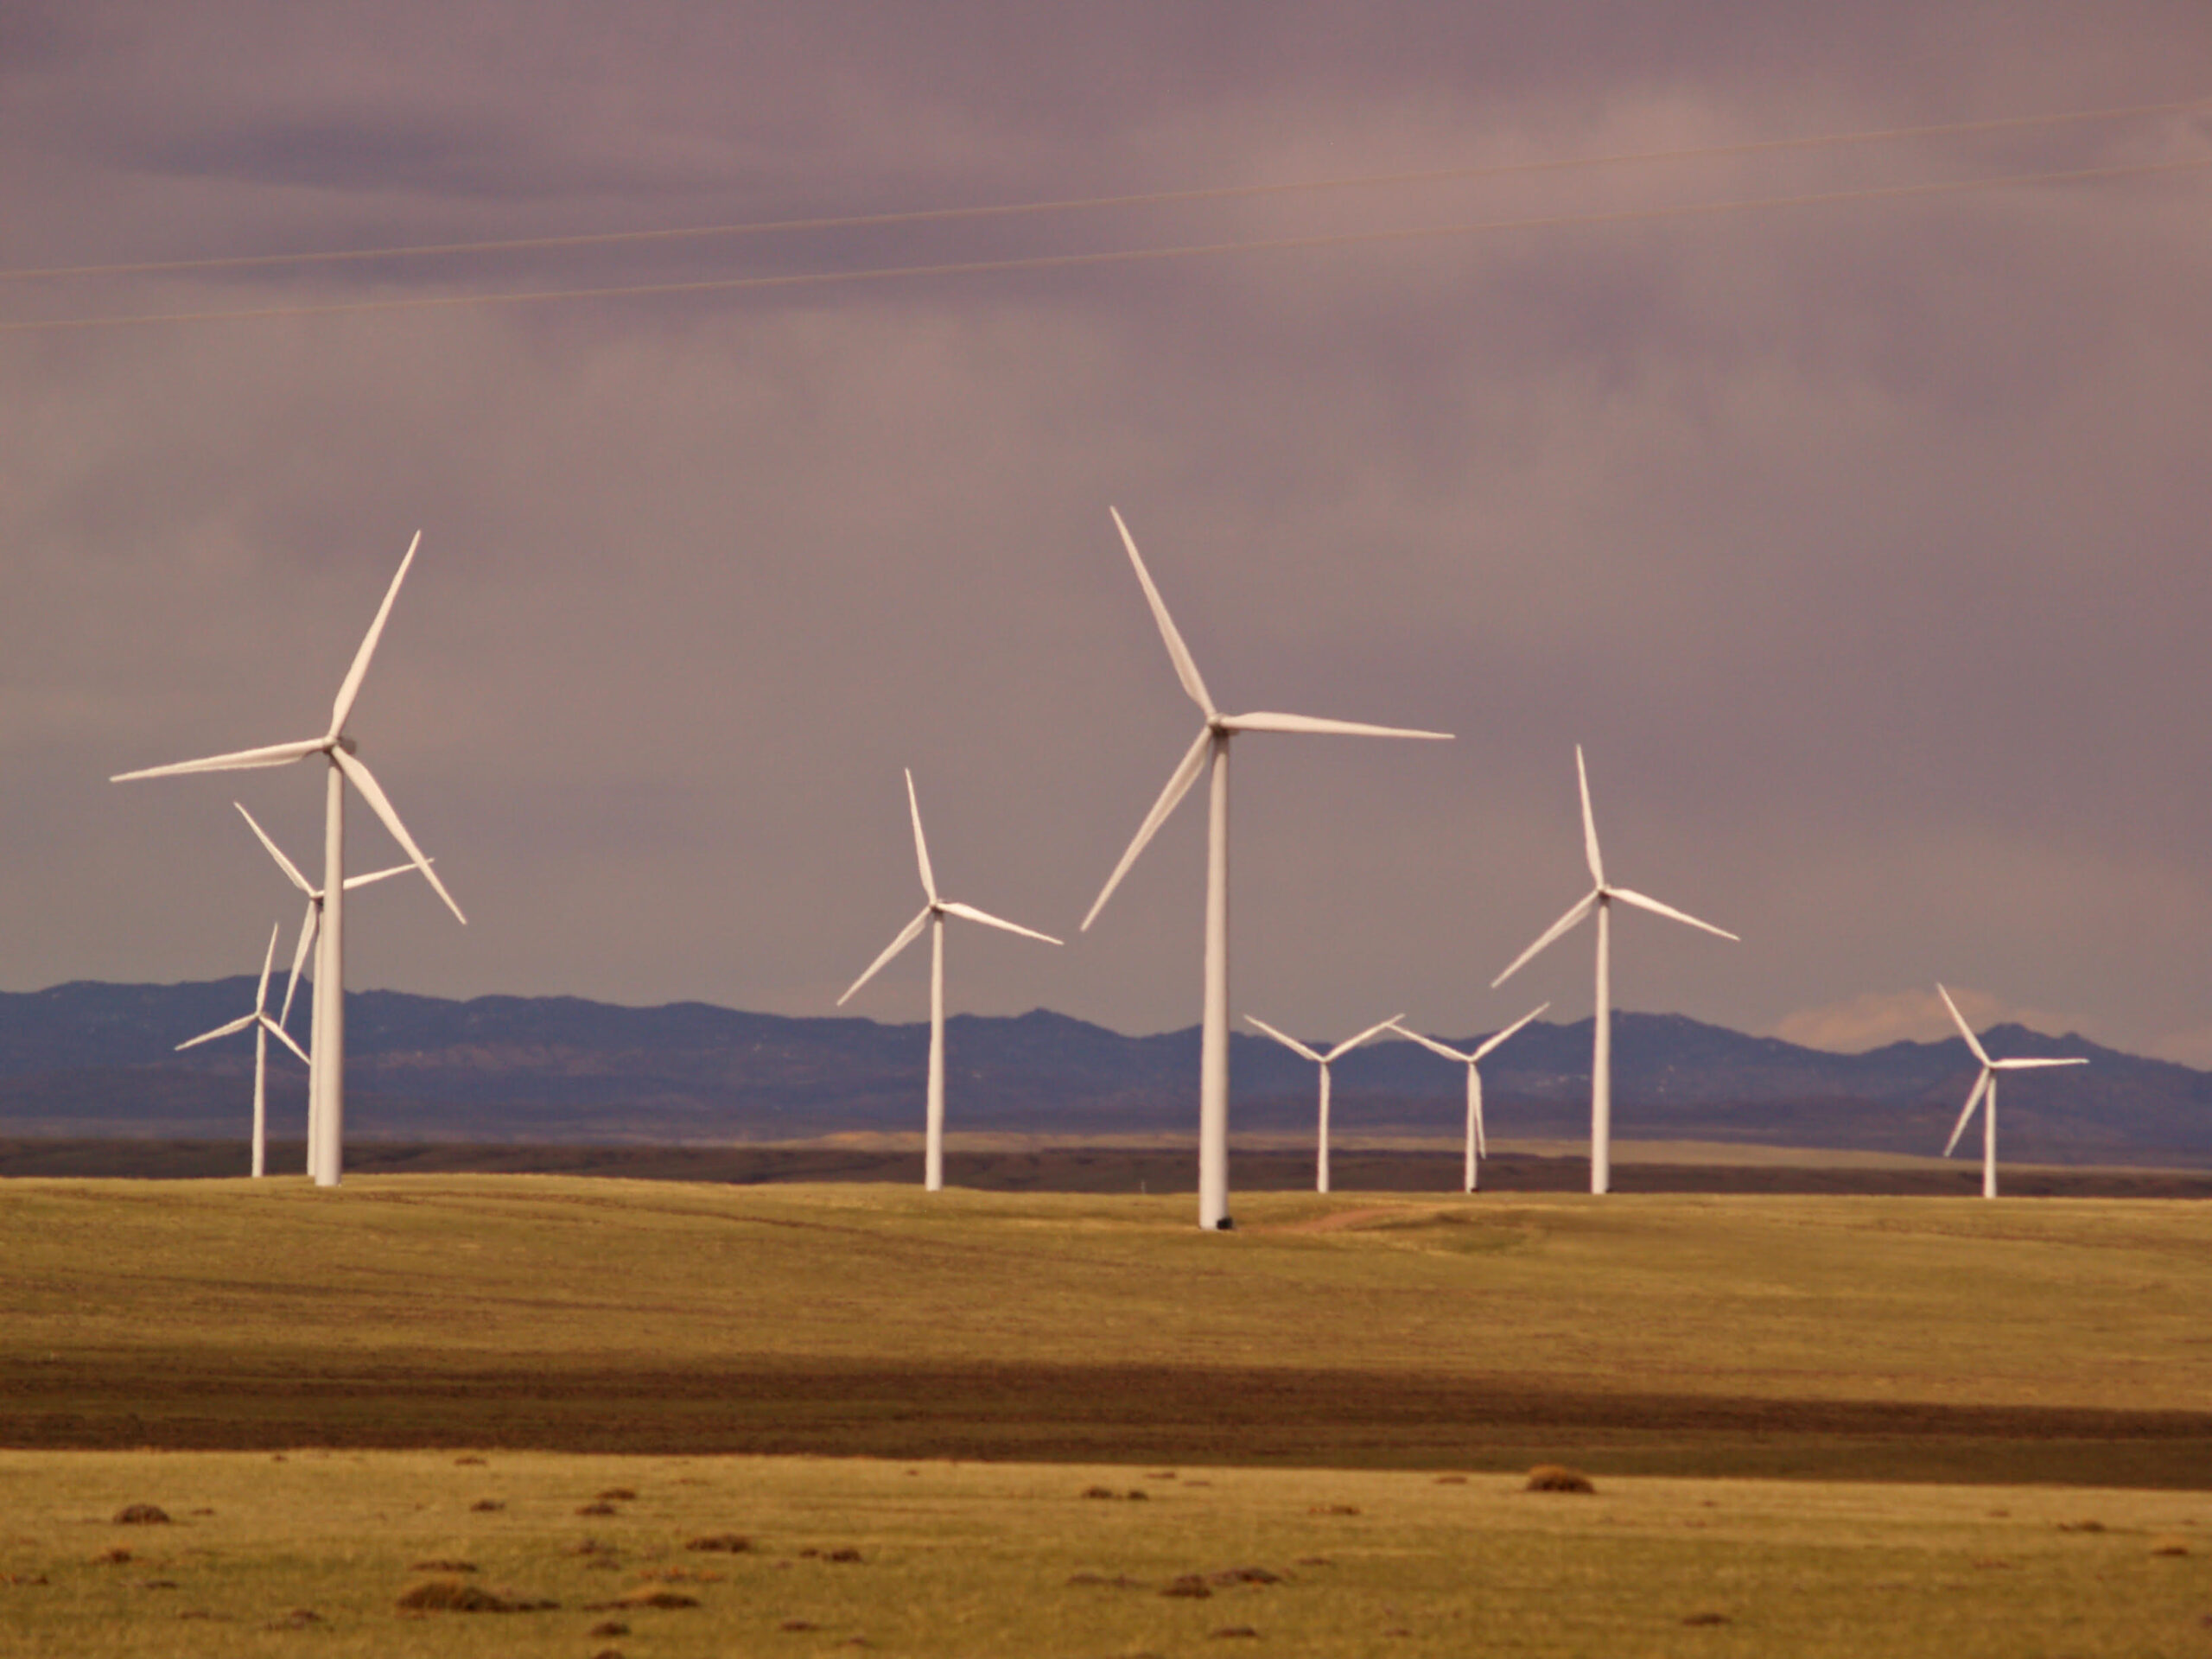 “America’s largest wind farm:” An environmental disaster?